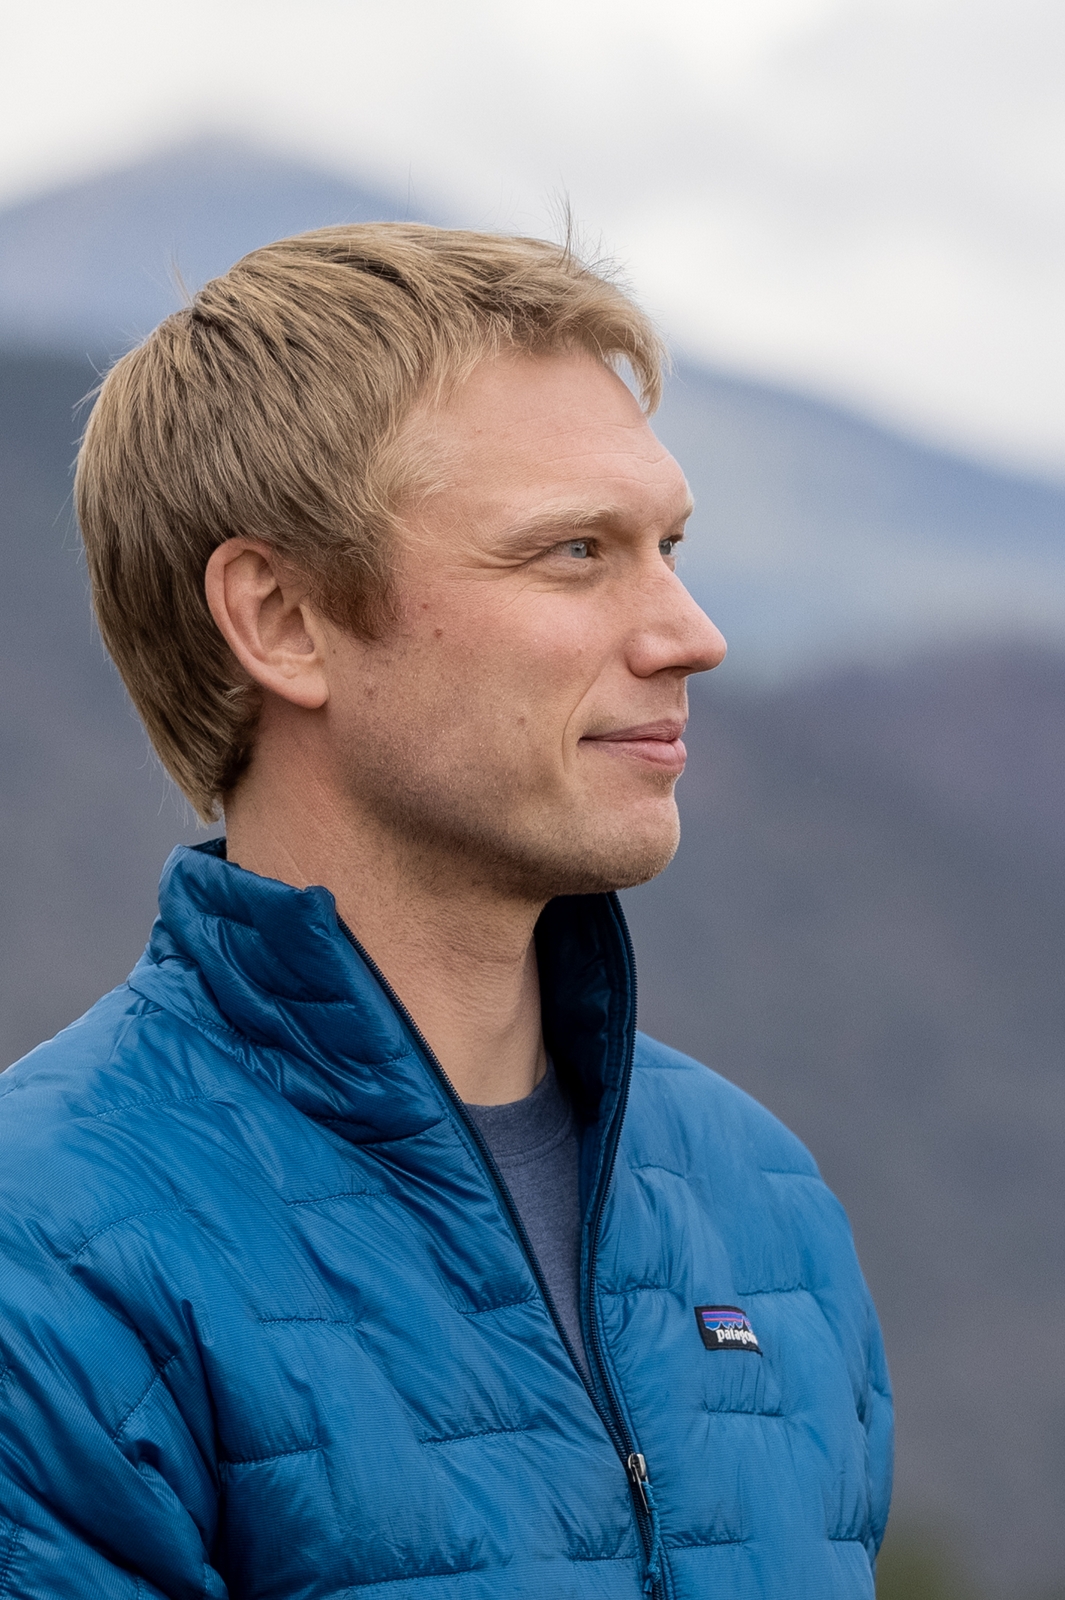 A man with blond hair looks into the distance. He is wearing a blue down coat.